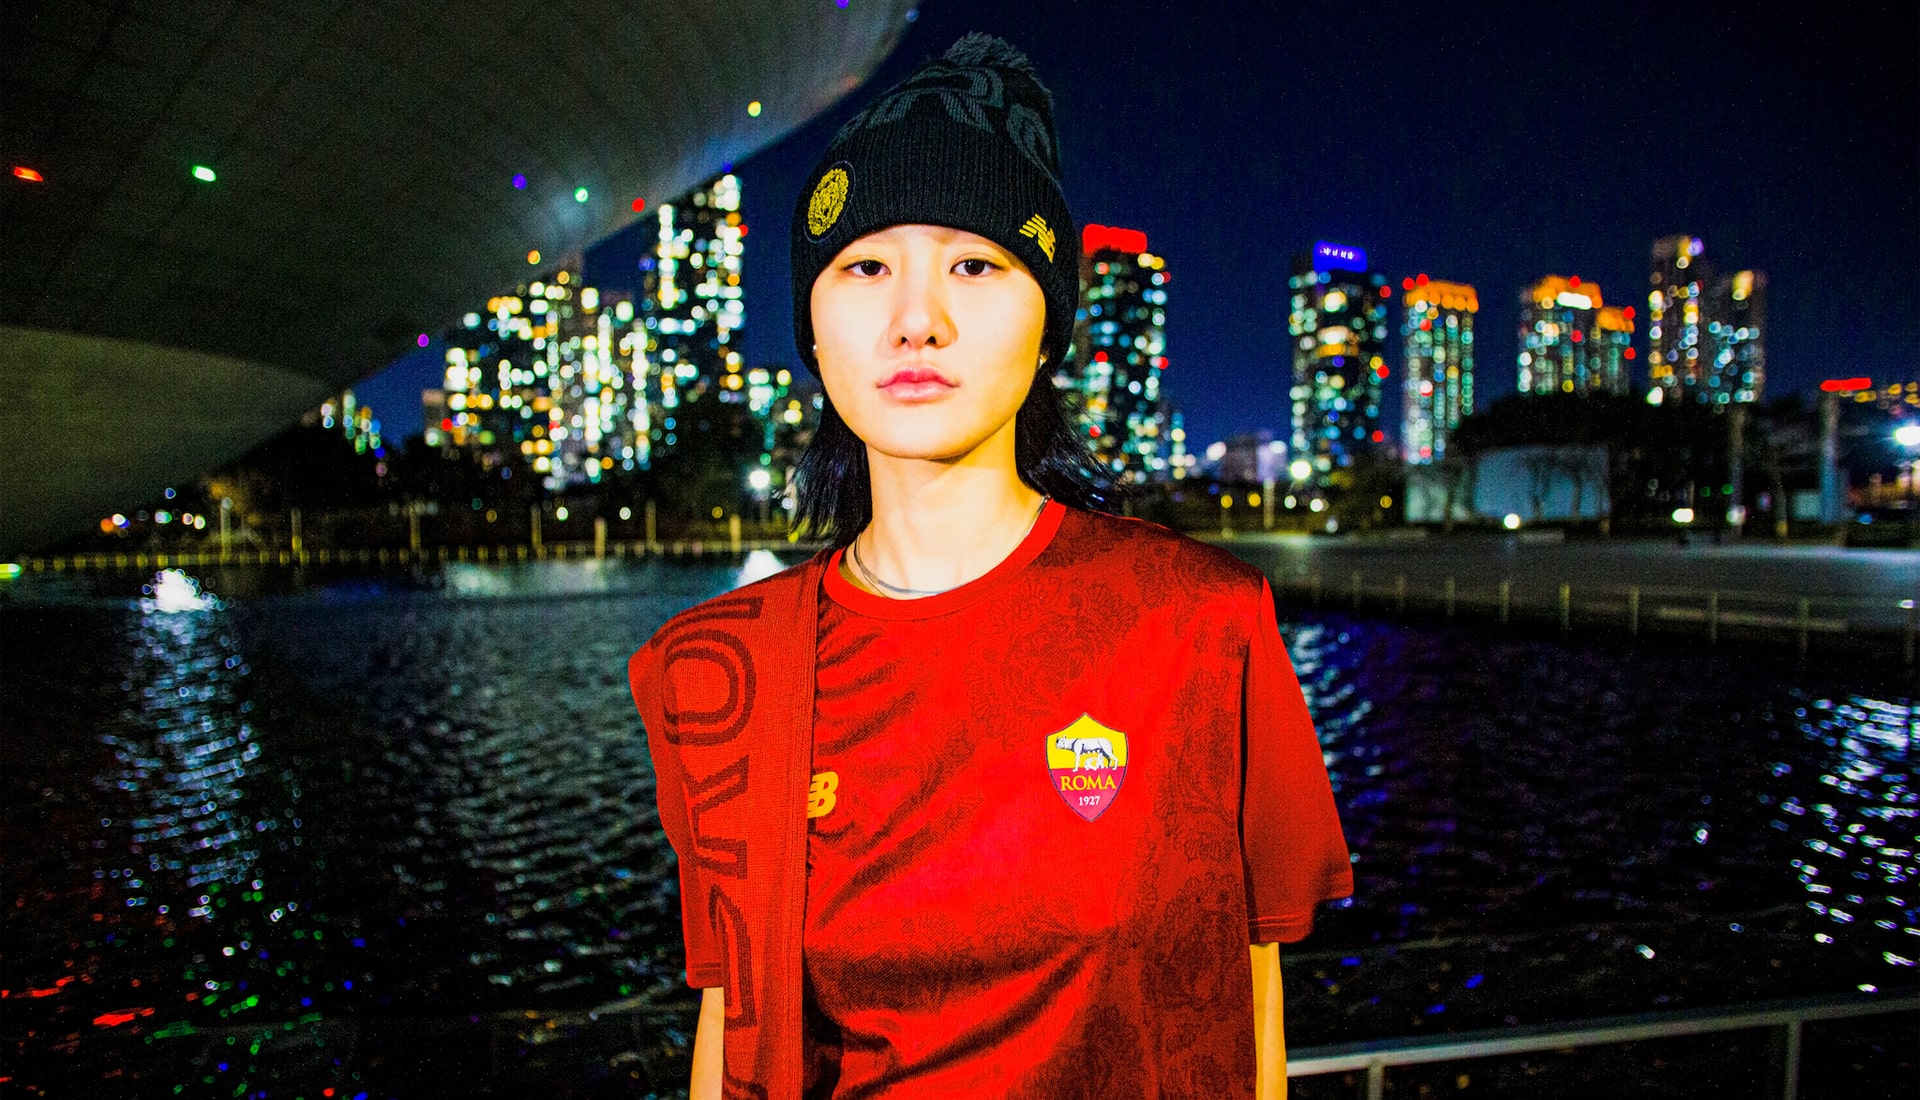 New Balance Launch AS Roma Lunar New Year Collection